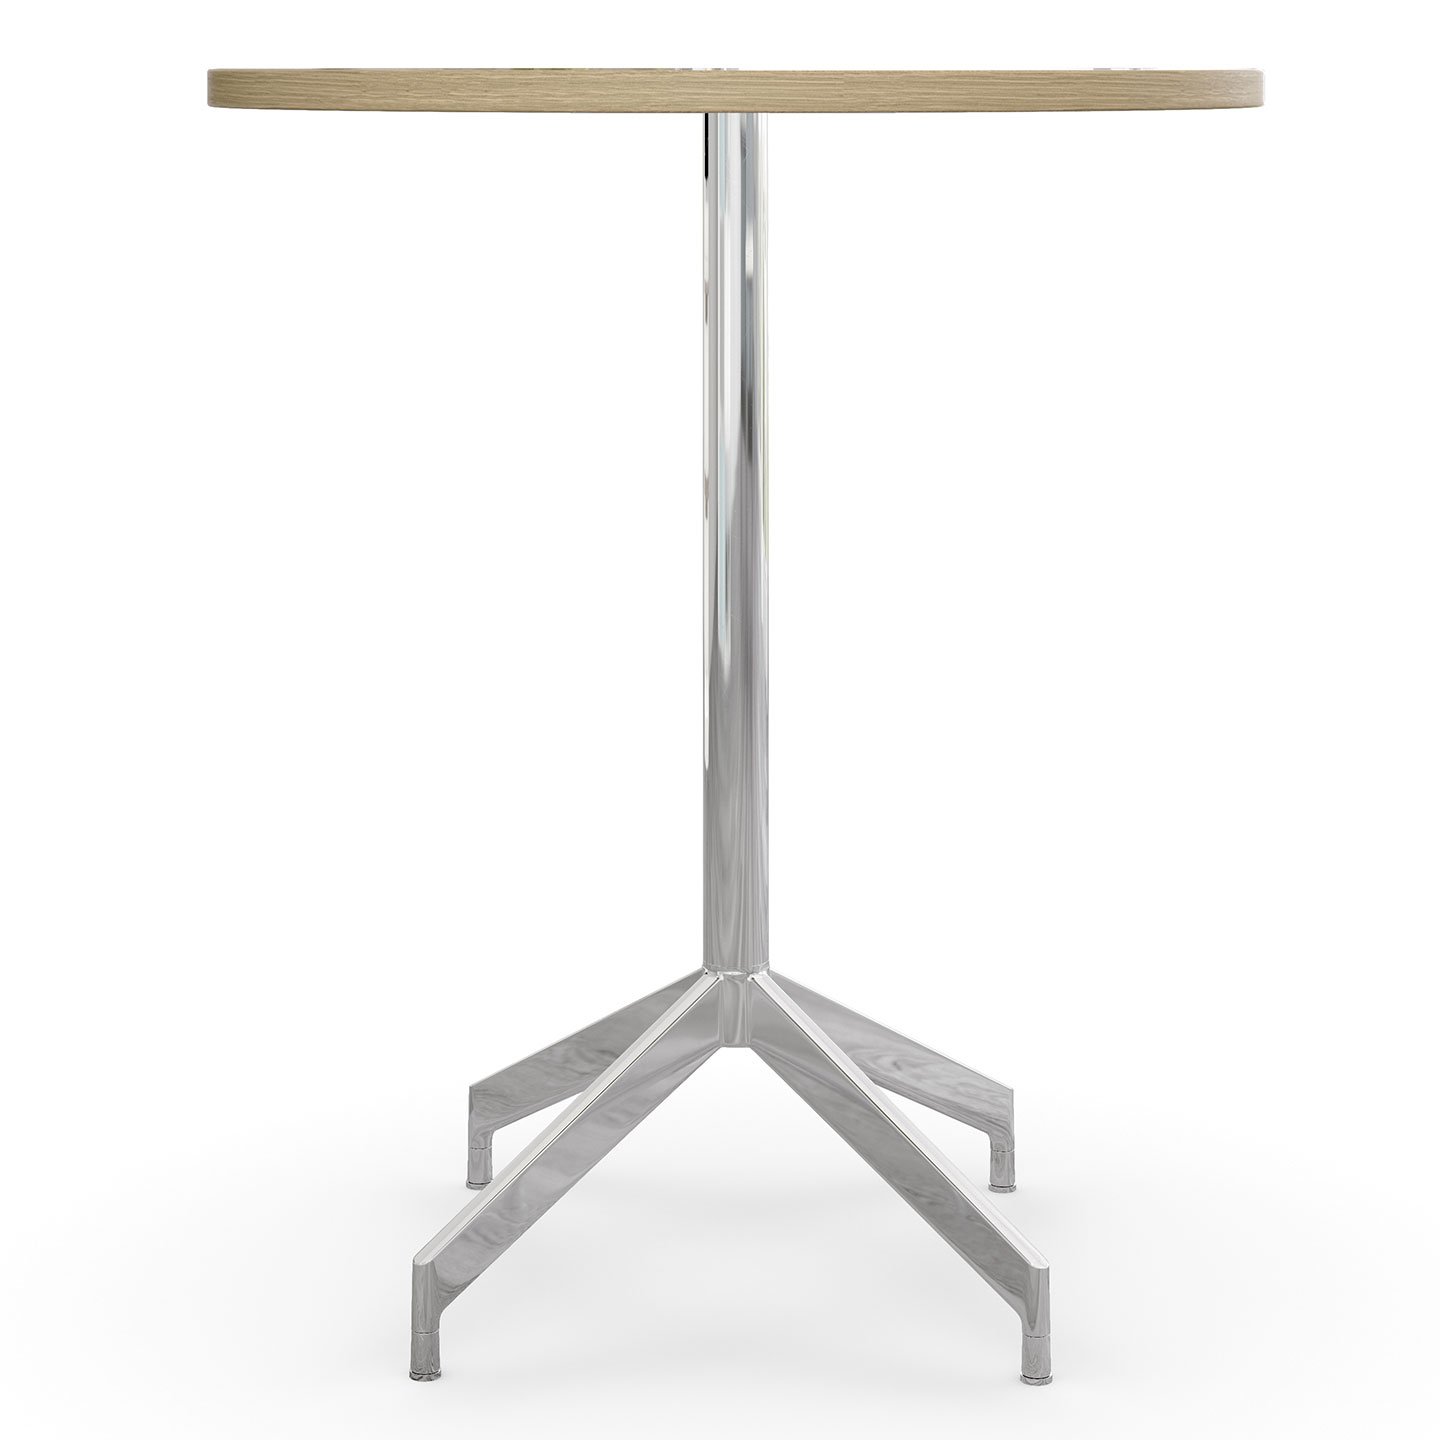 Haworth Planes Collaborative Table with circular maple top and steel leg